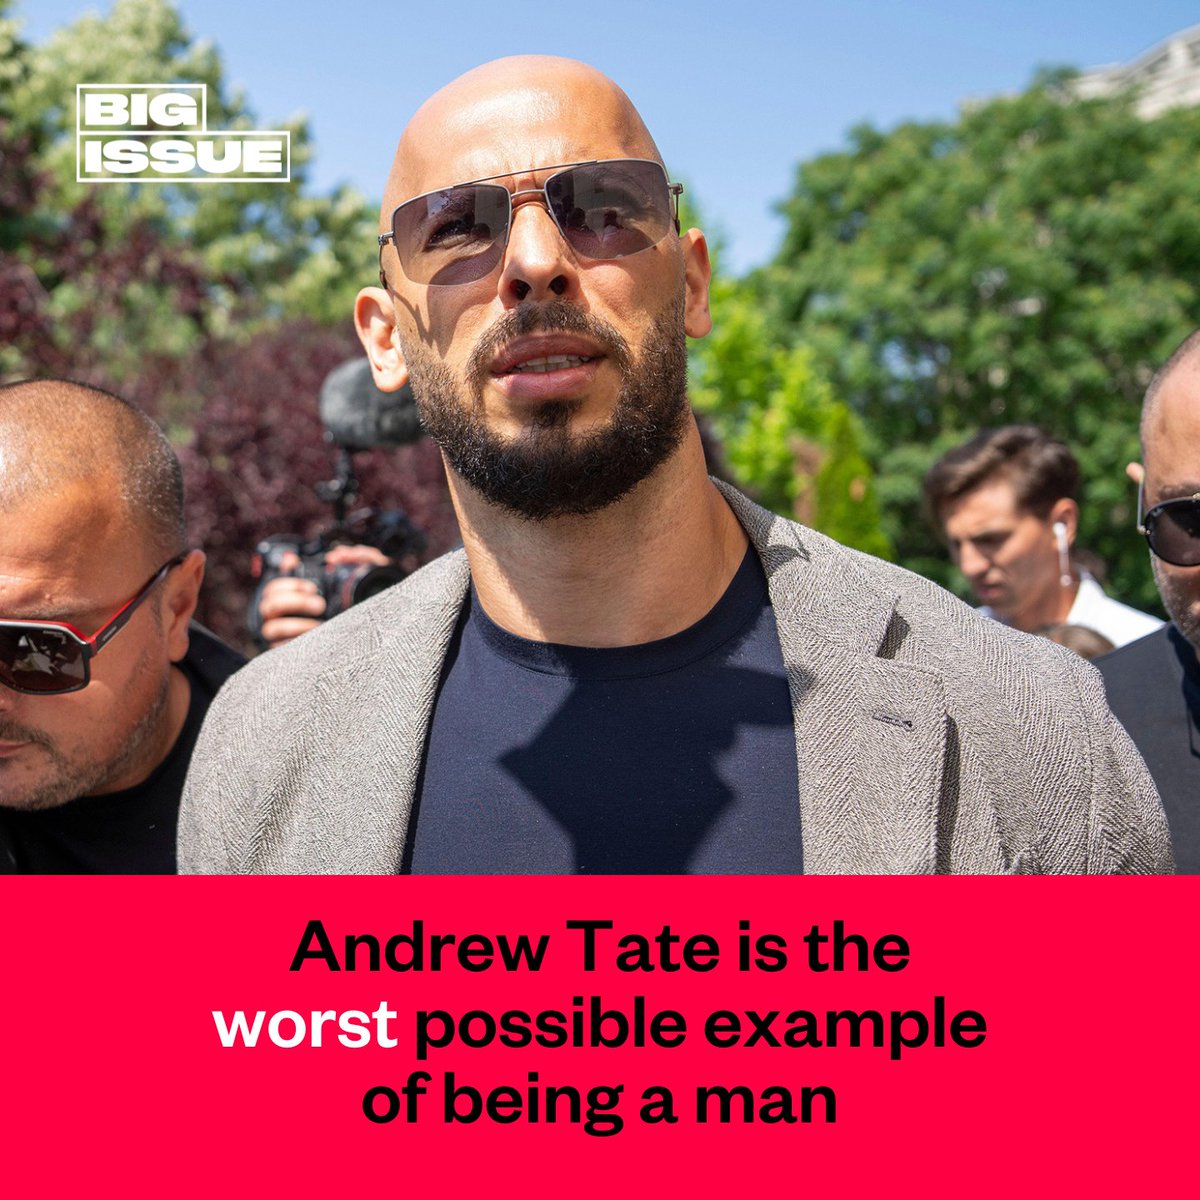 Young men are being raised on a toxic online diet of Andrew Tate & his ilk, and it's doing them serious harm, writes @DelaneyMan. ✍️ “Tate is, of course, the symptom & not the cause of this lonely and pitiful brand of modern masculinity.” Read more. 👇 bigissue.com/opinion/andrew…